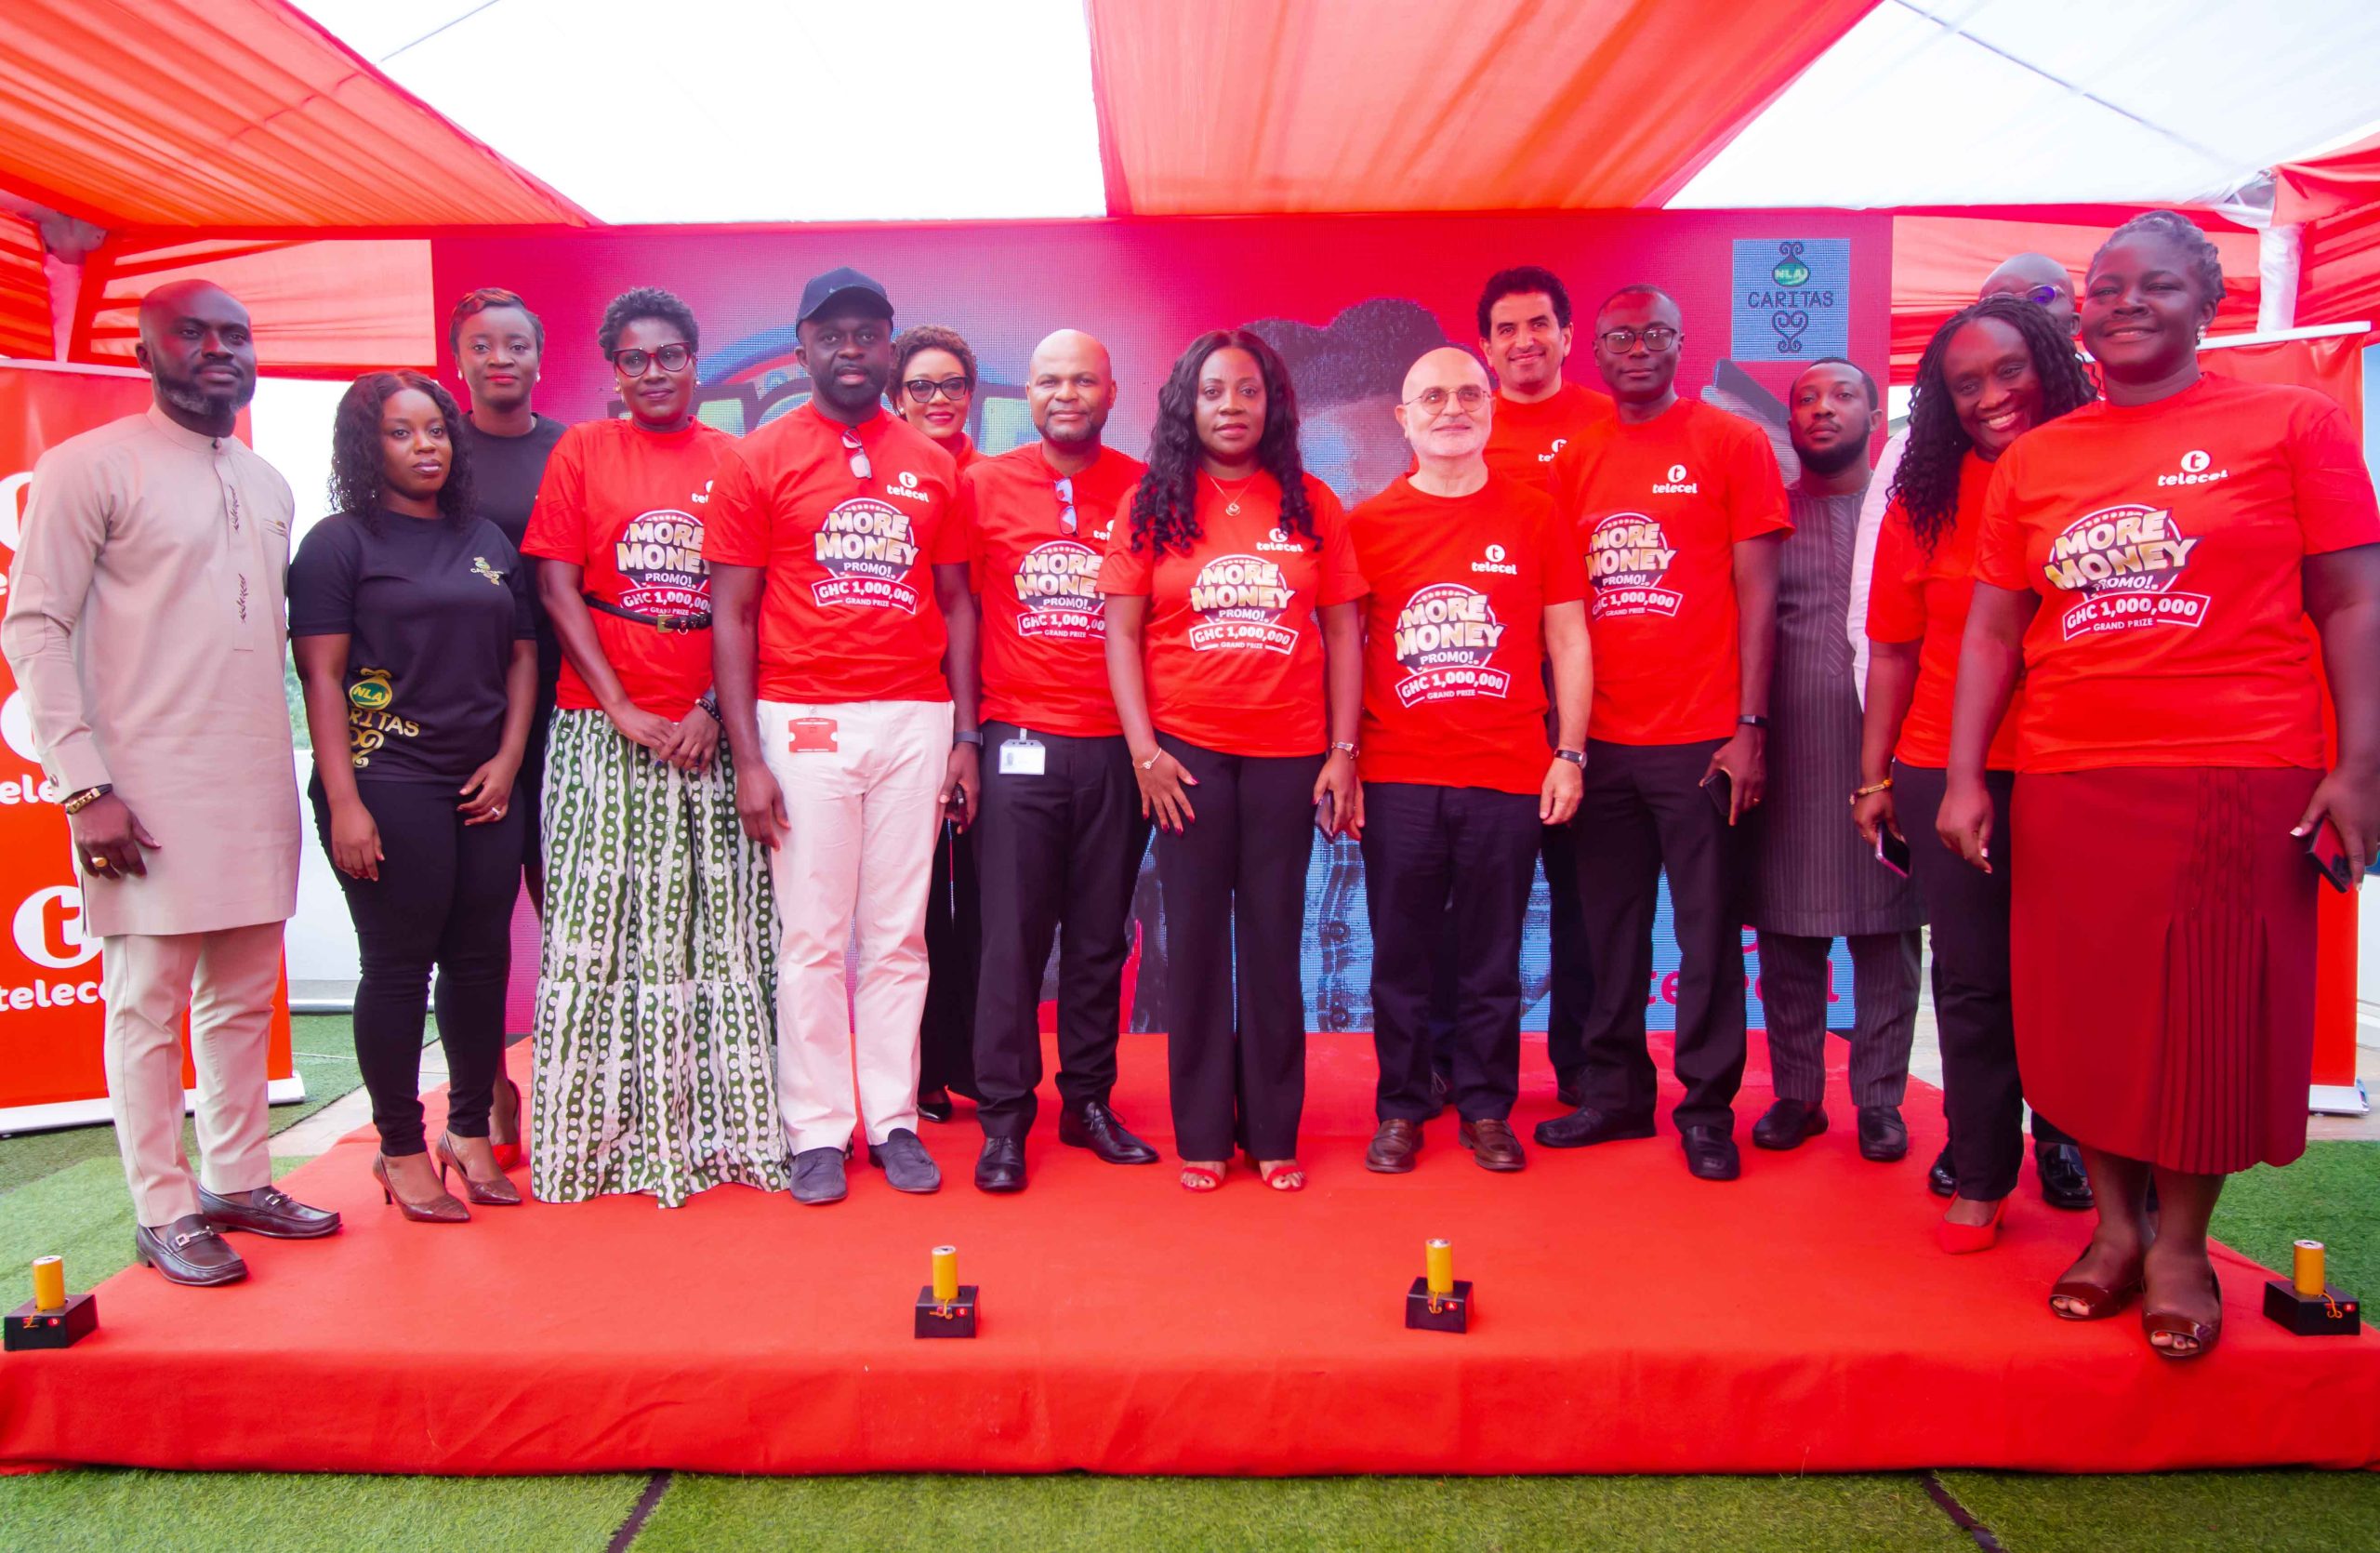 Telecel More Money Promo launched with grand prize of GHS 1 million